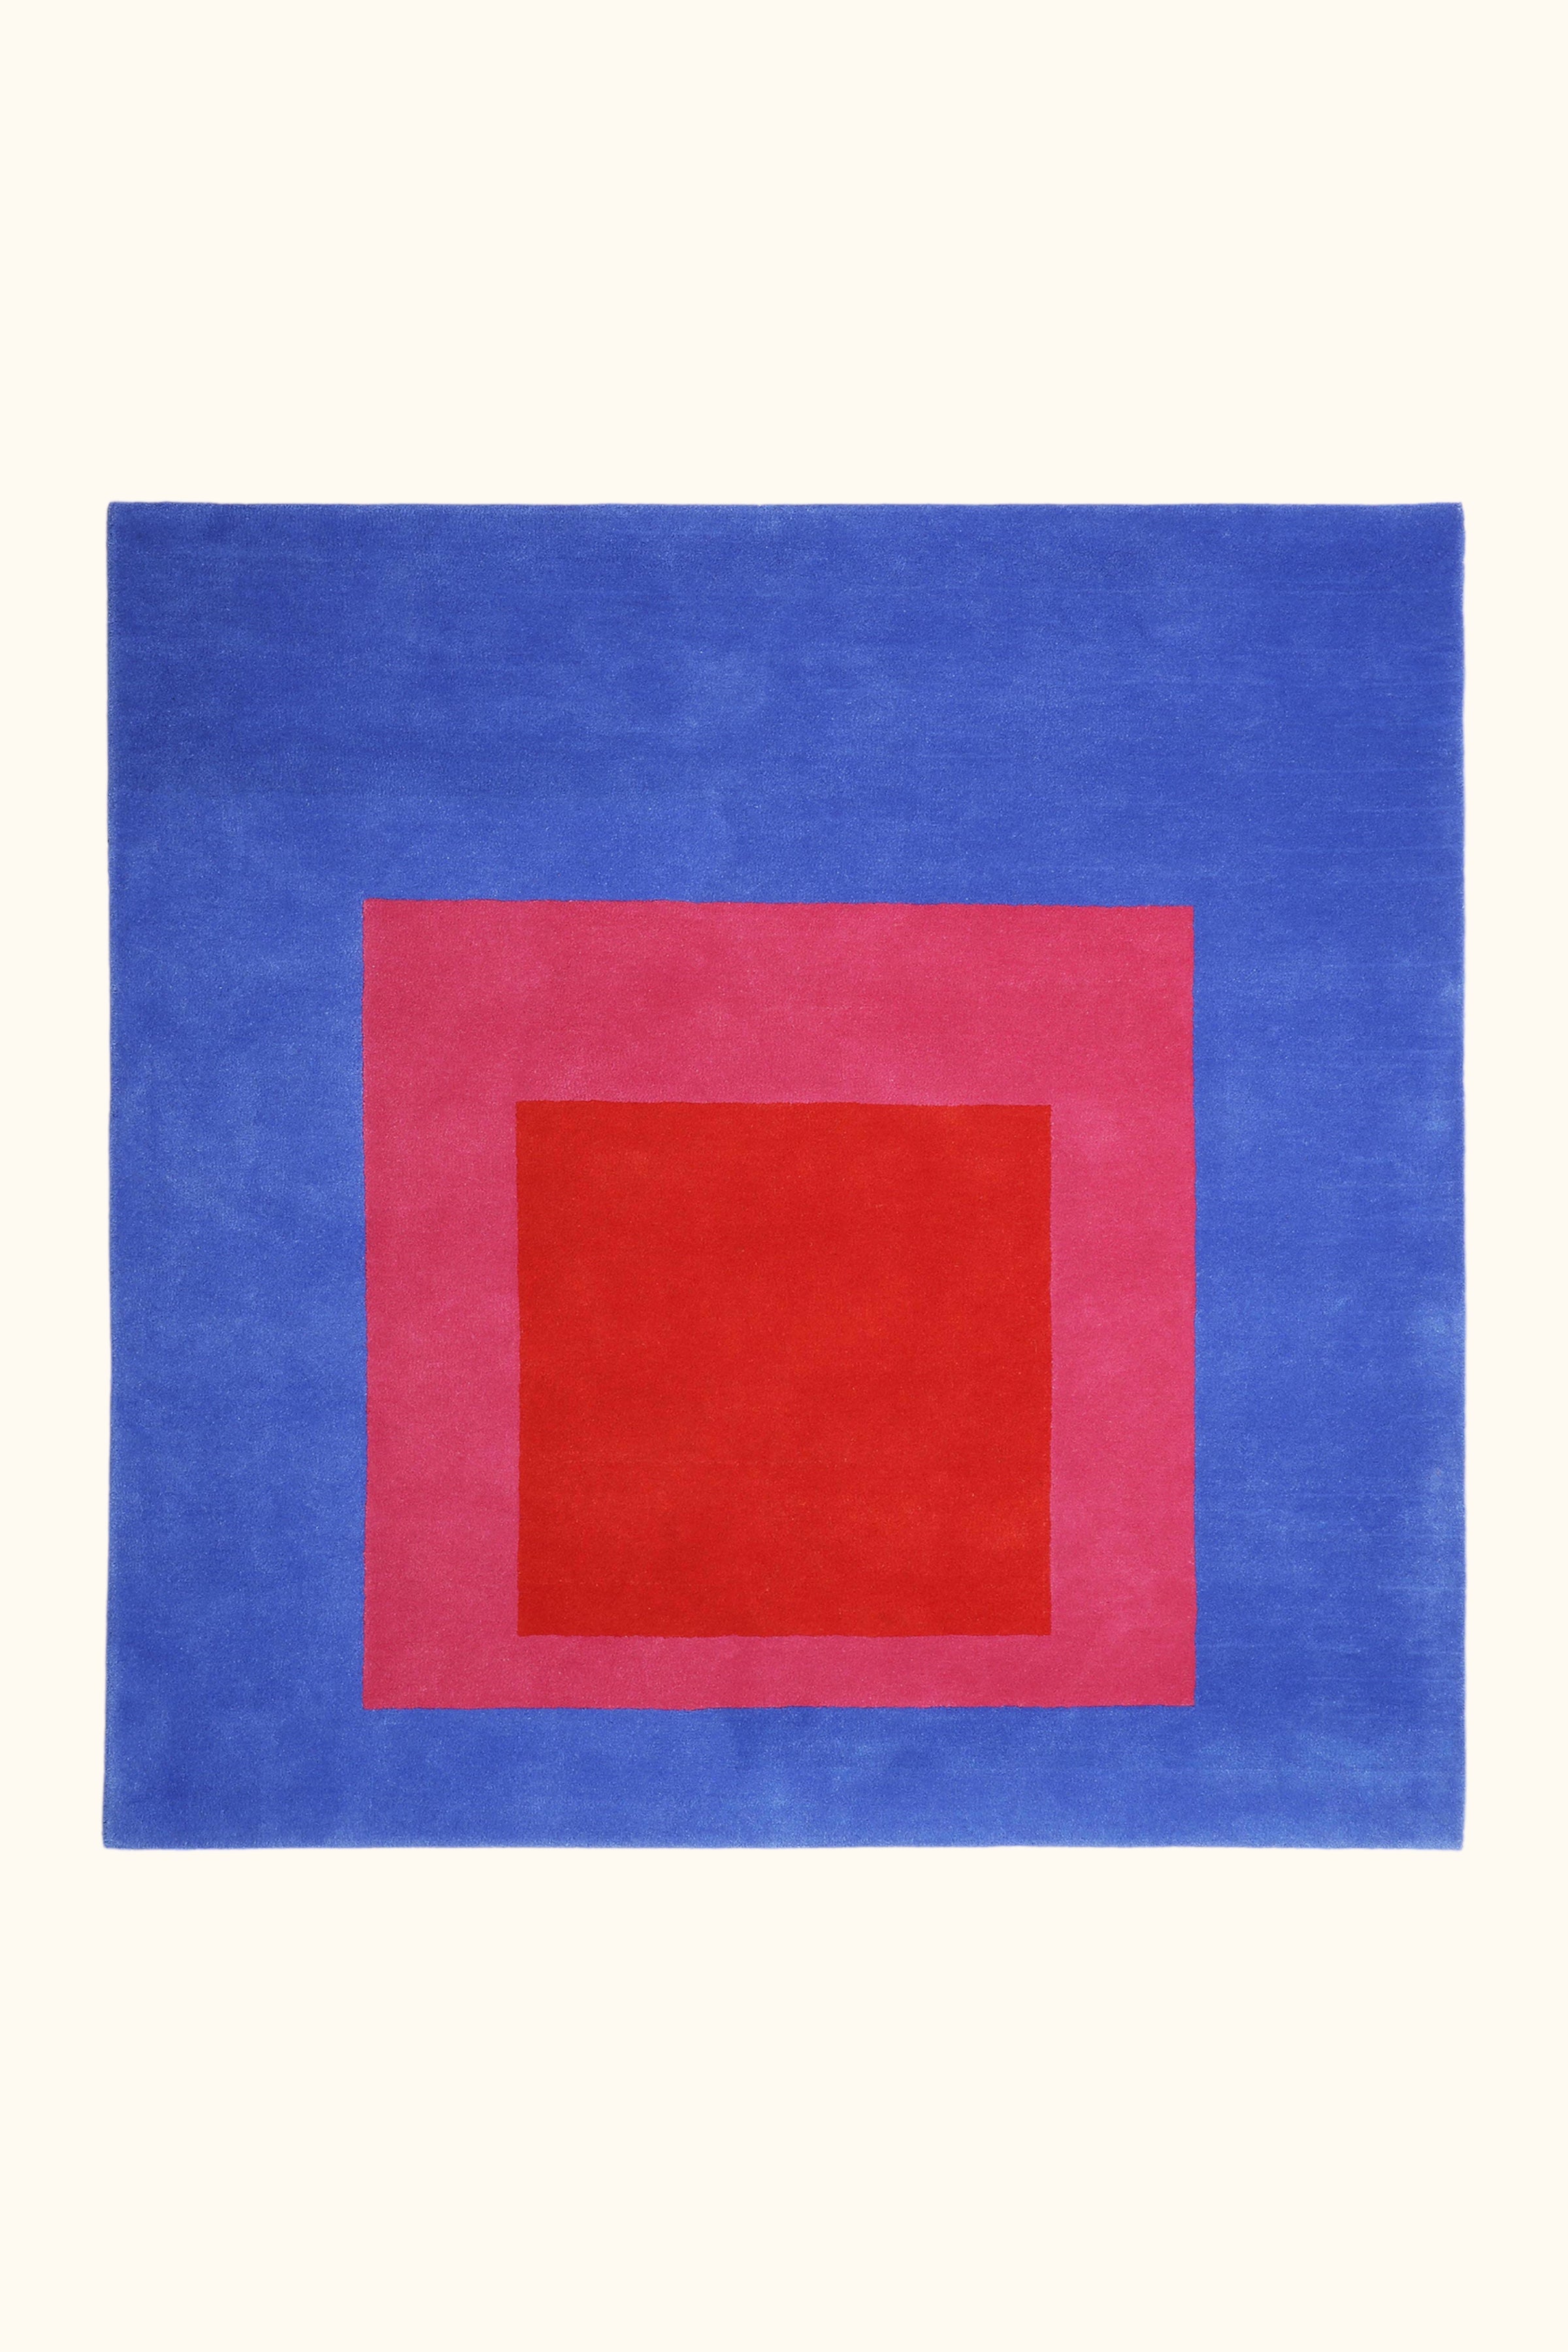 Josef Albers Bauhaus rug 'HOMAGE TO THE SQUARE' Blue/Red 175x175cm